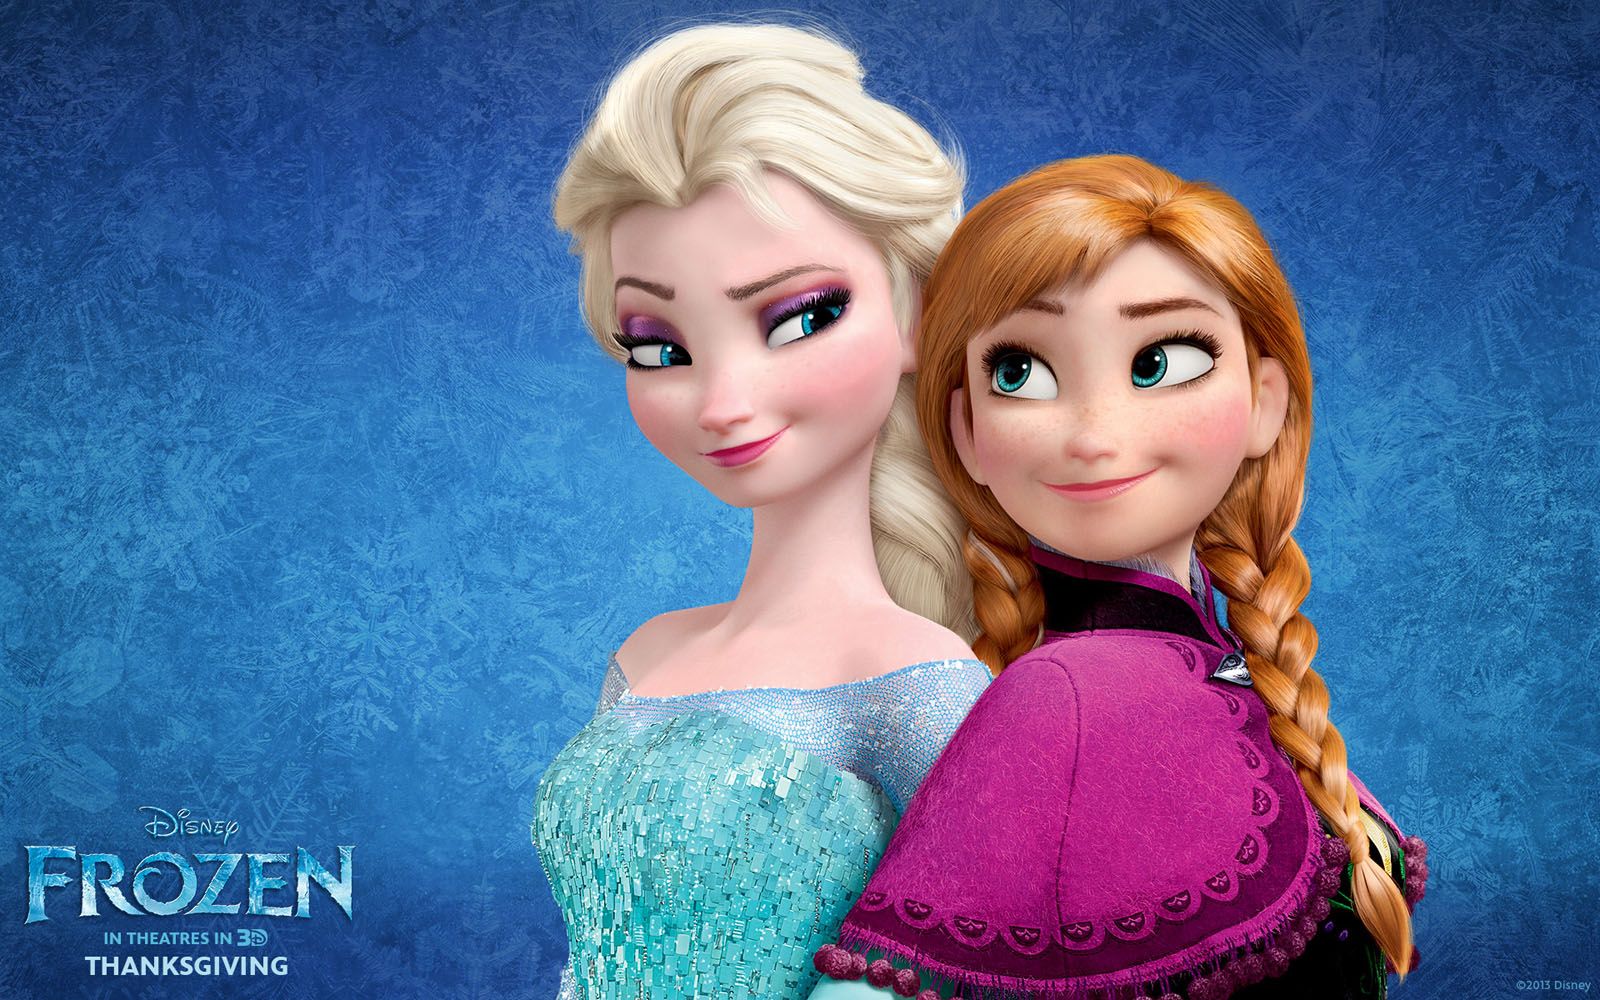 Disney Frozen Character designs, Wallpaper and Trailers from latest animation movie